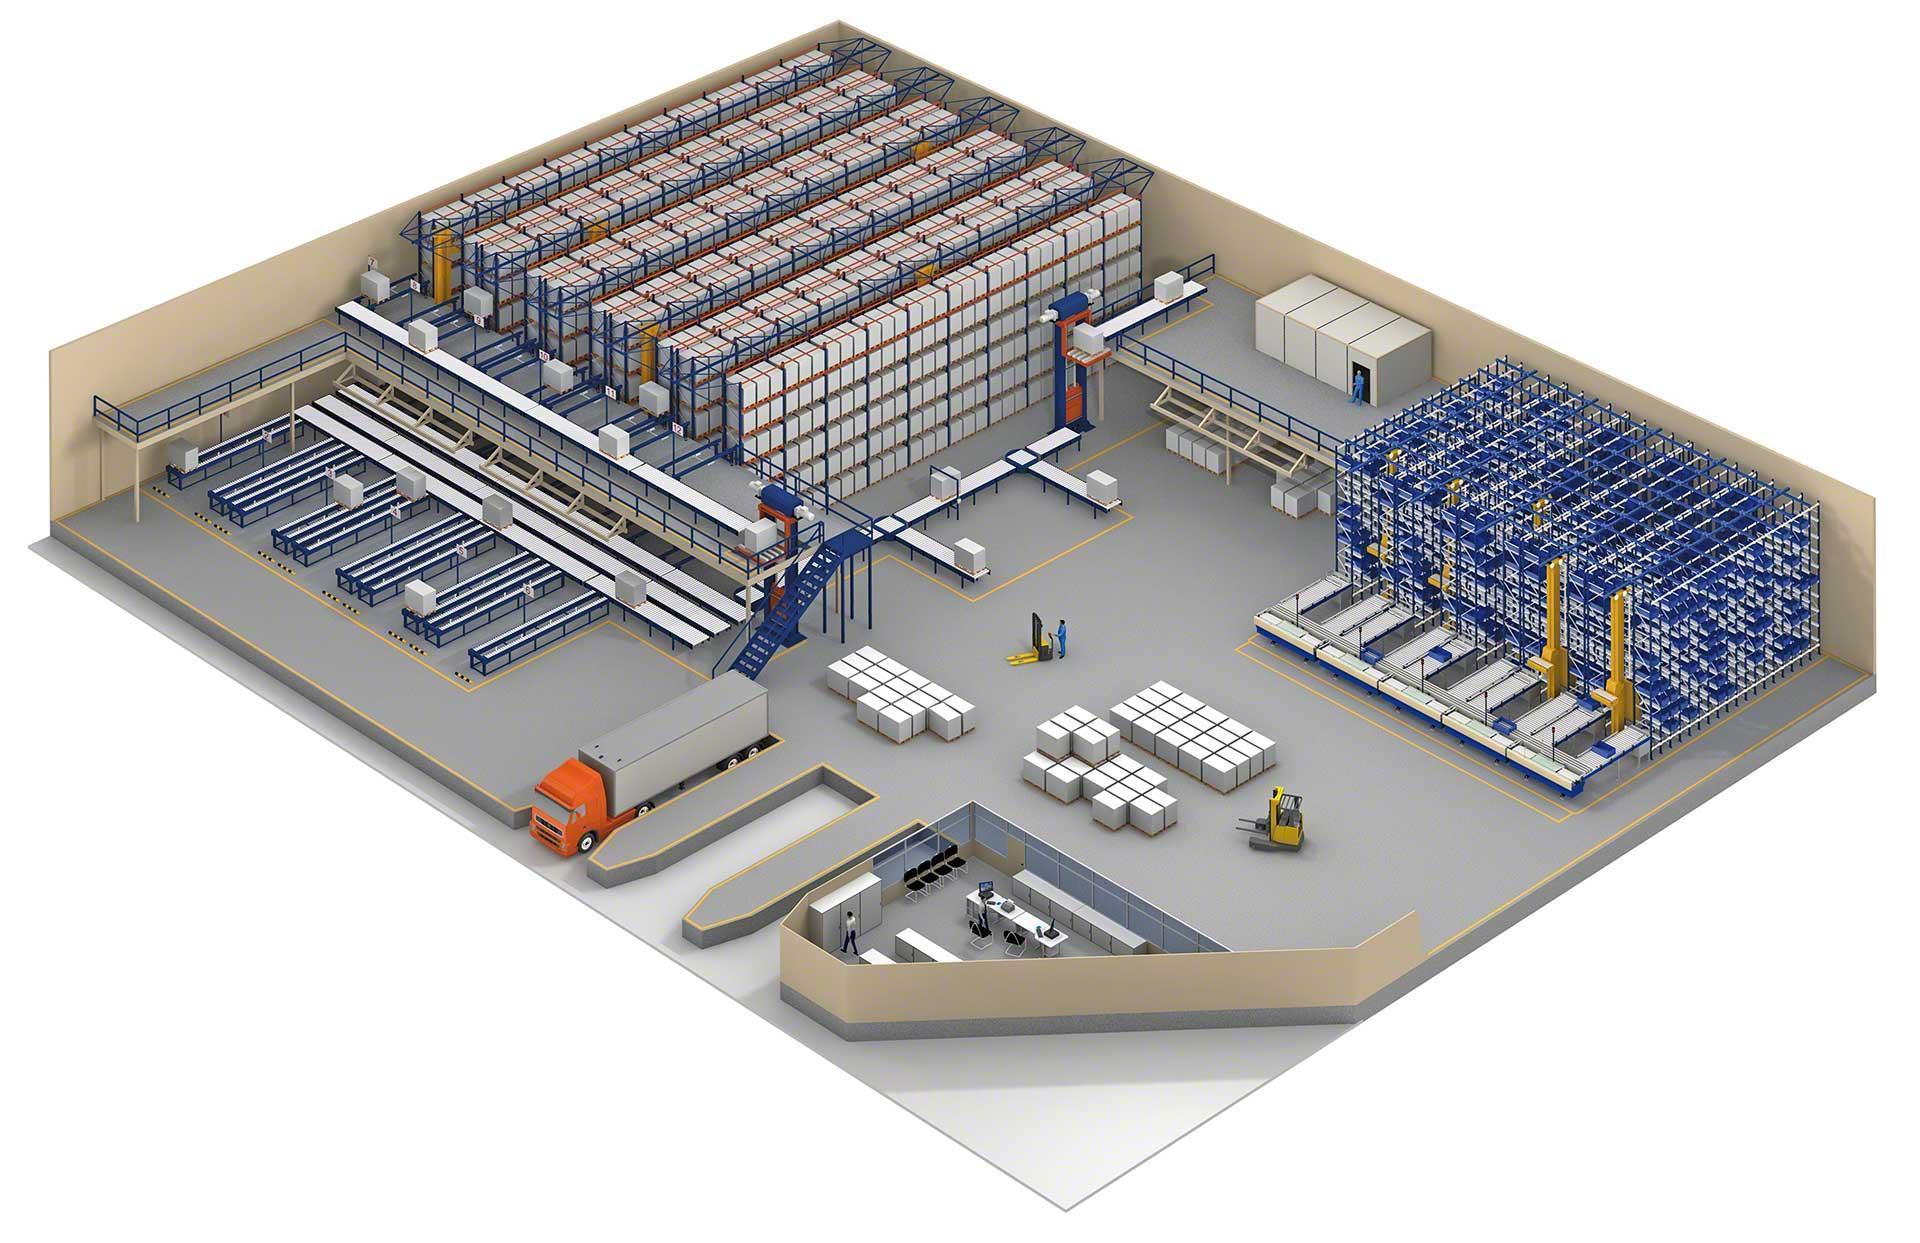 The proper organisation and distribution of space is one of the keys to successful management of a logistics warehouse